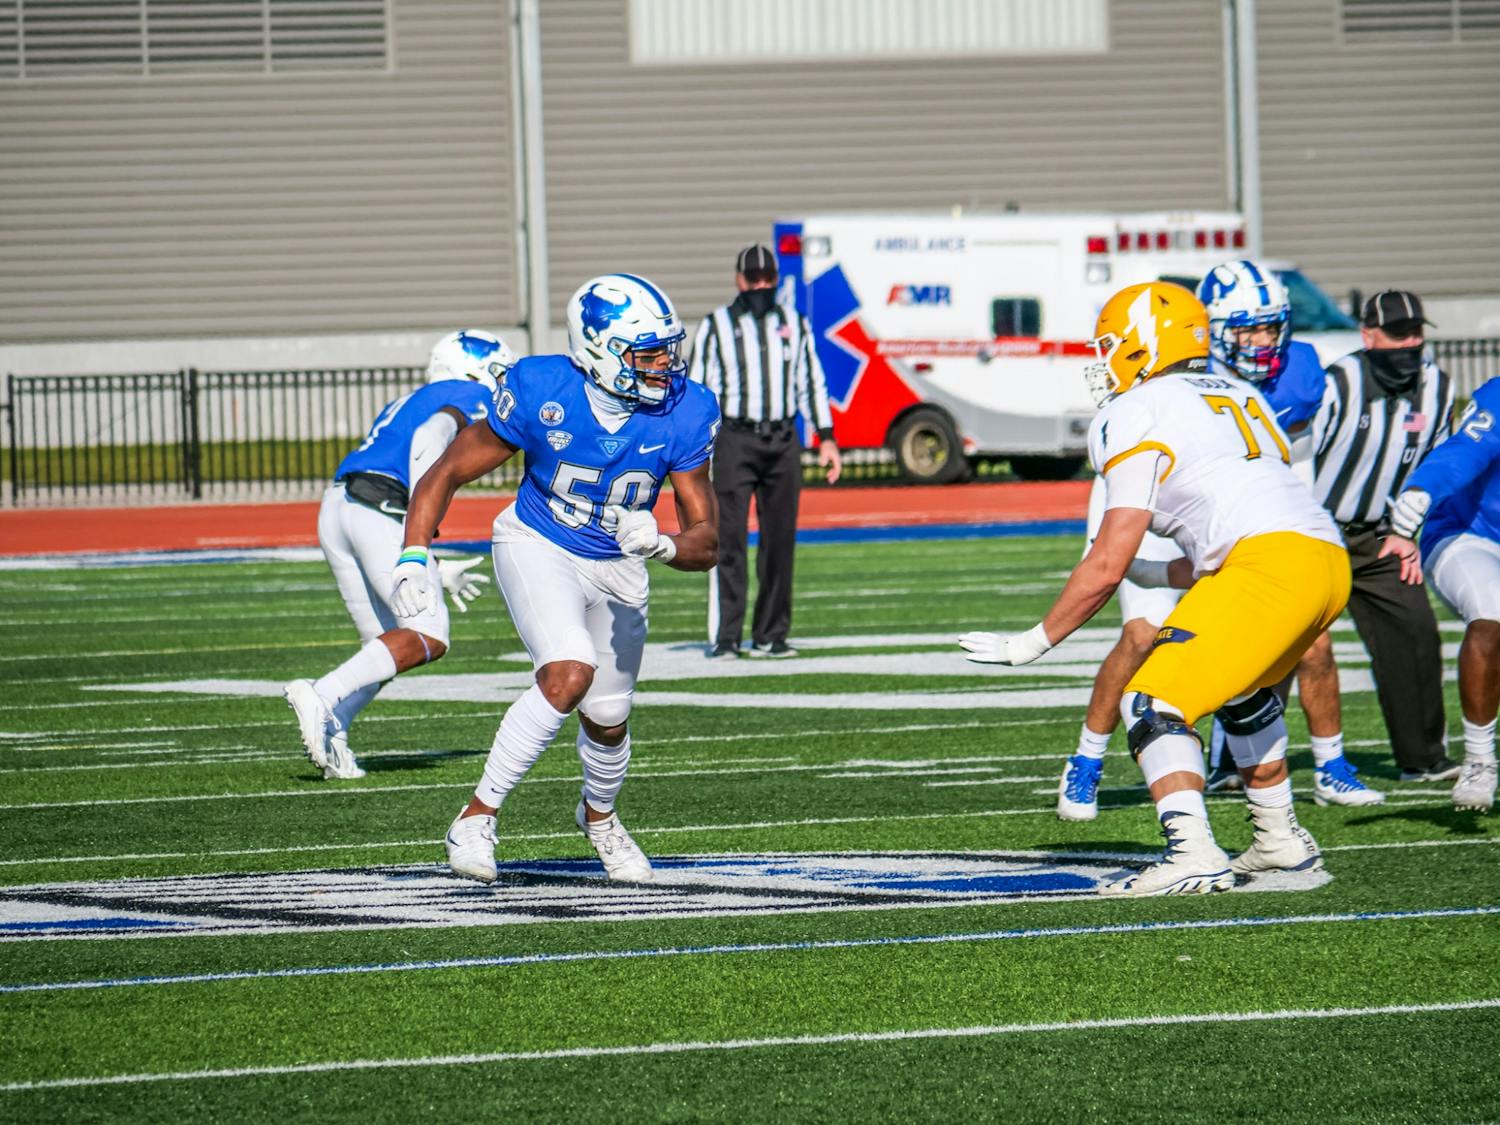 UB defensive end Malcom Koonce was selected No. 79 overall in the 2021 NFL Draft by the Las Vegas Raiders.